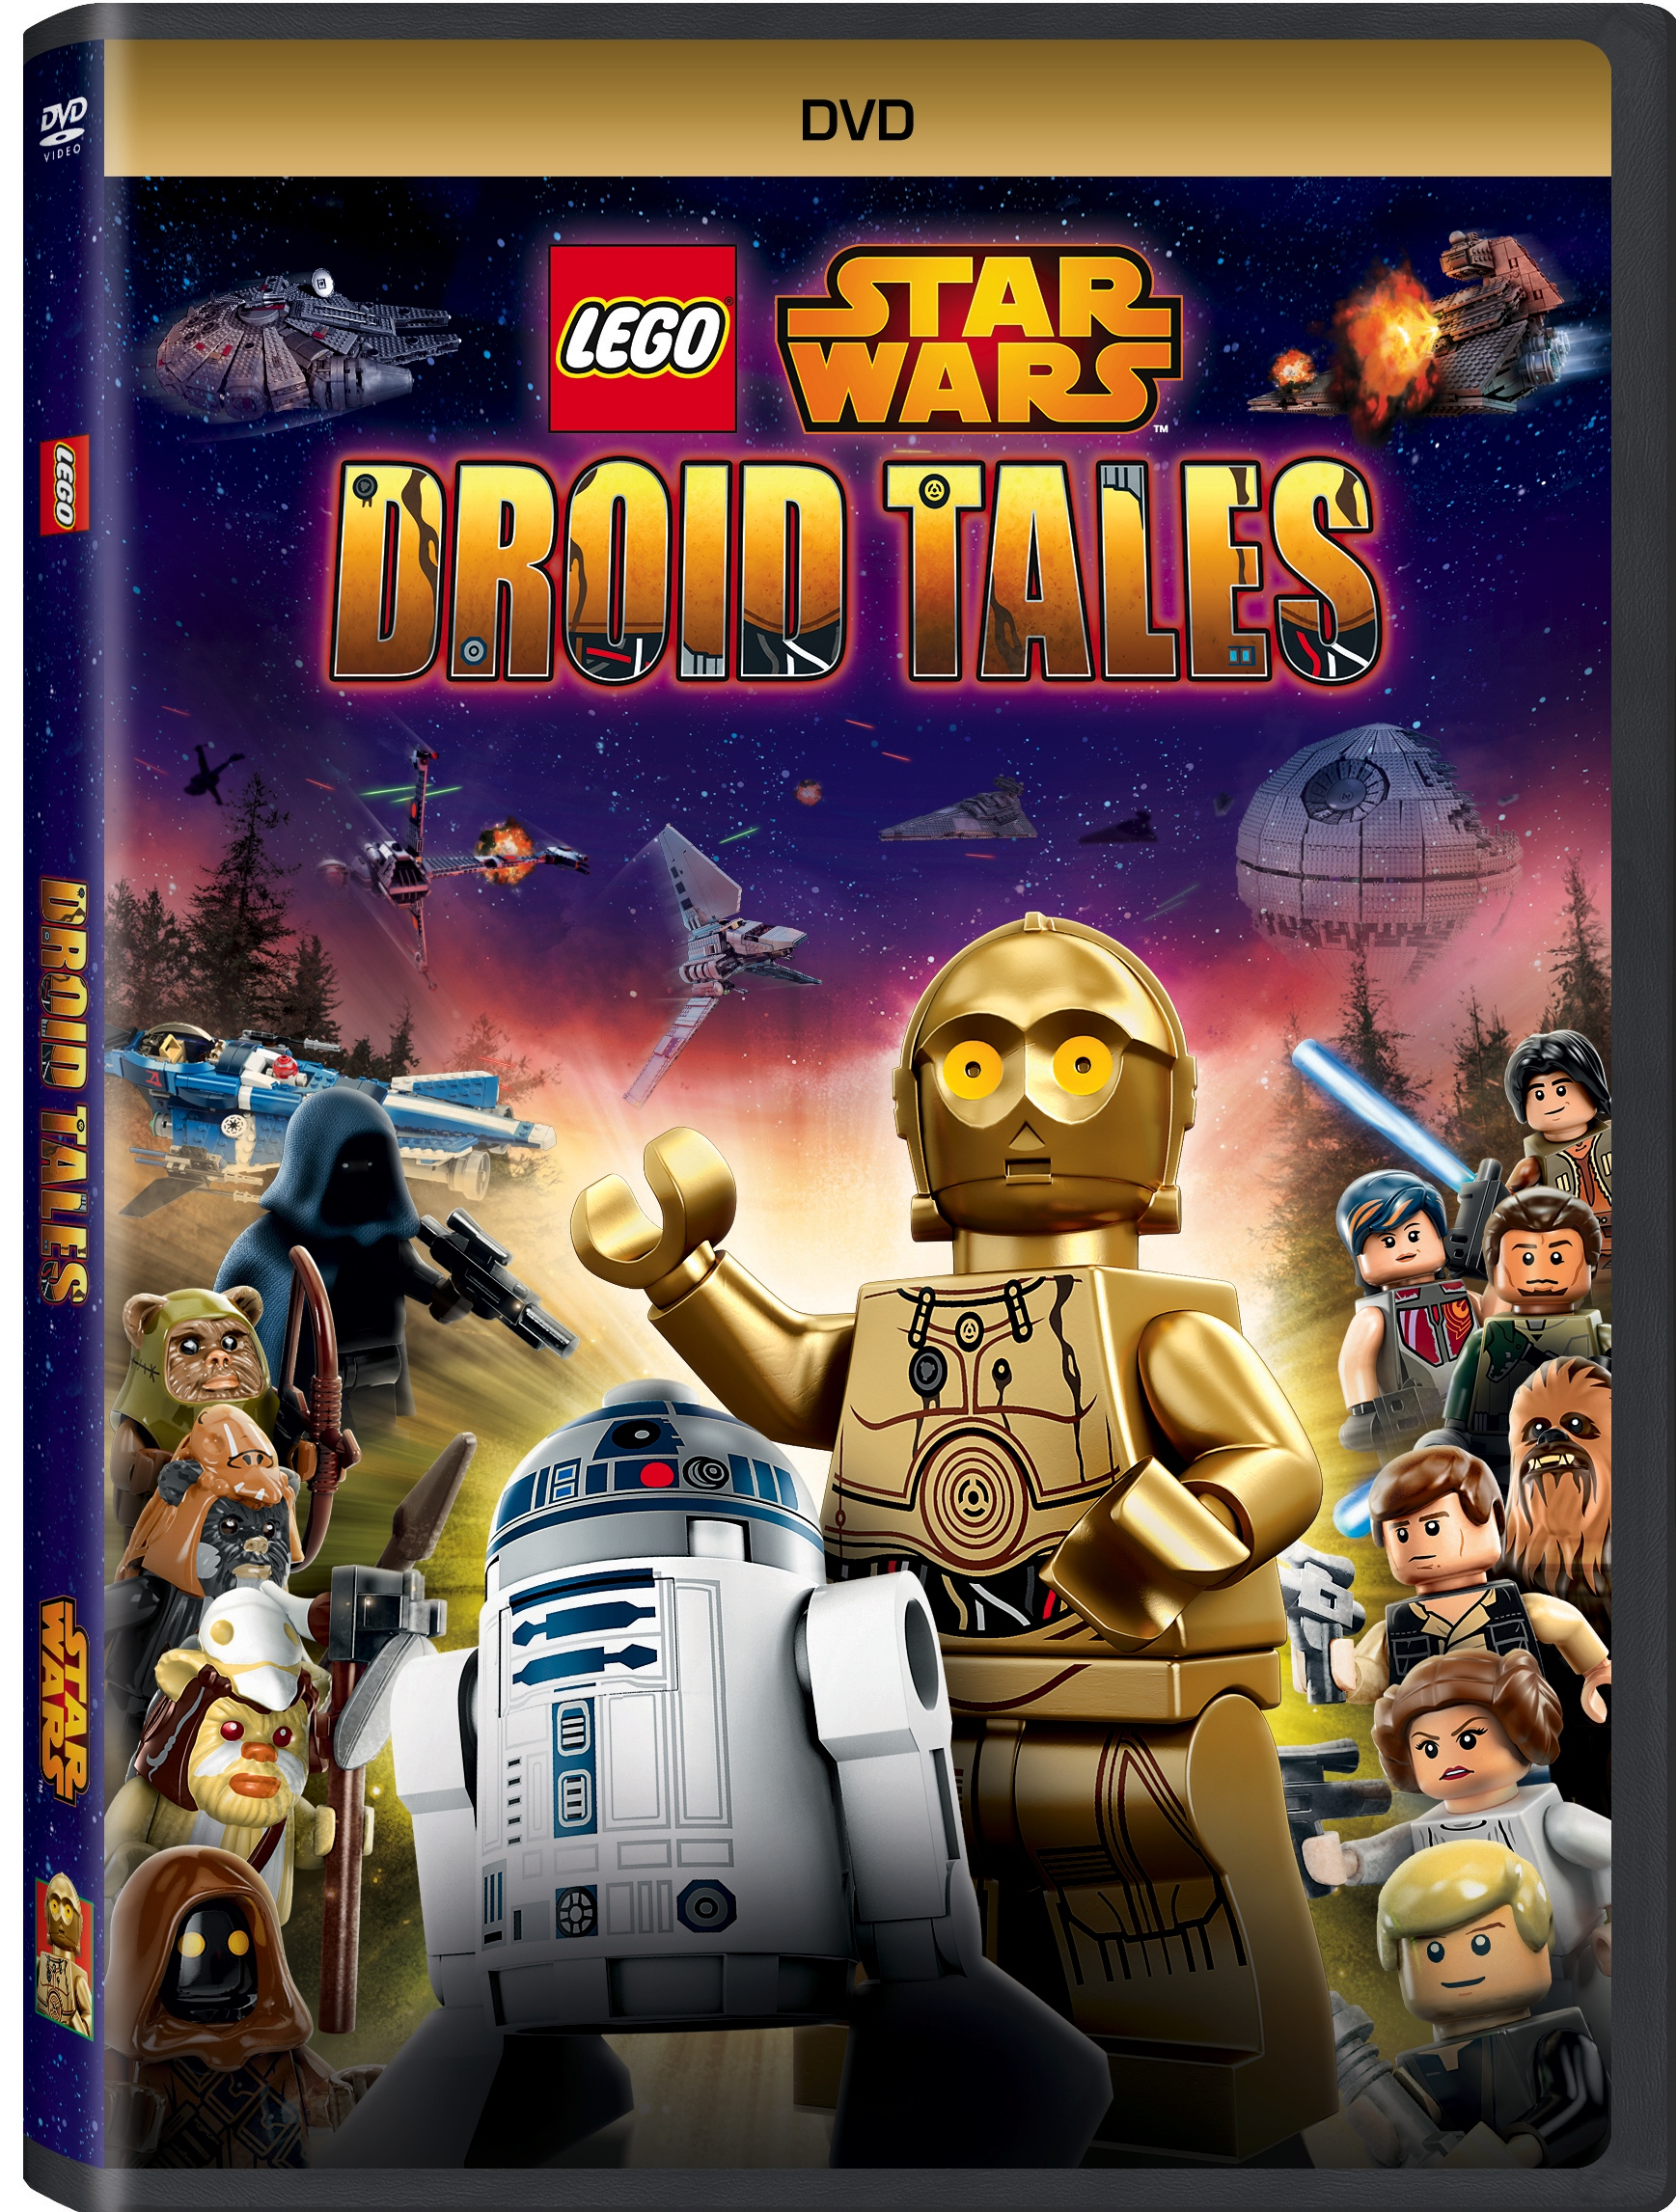 Lego Star Wars: Droid Tales DVD Review